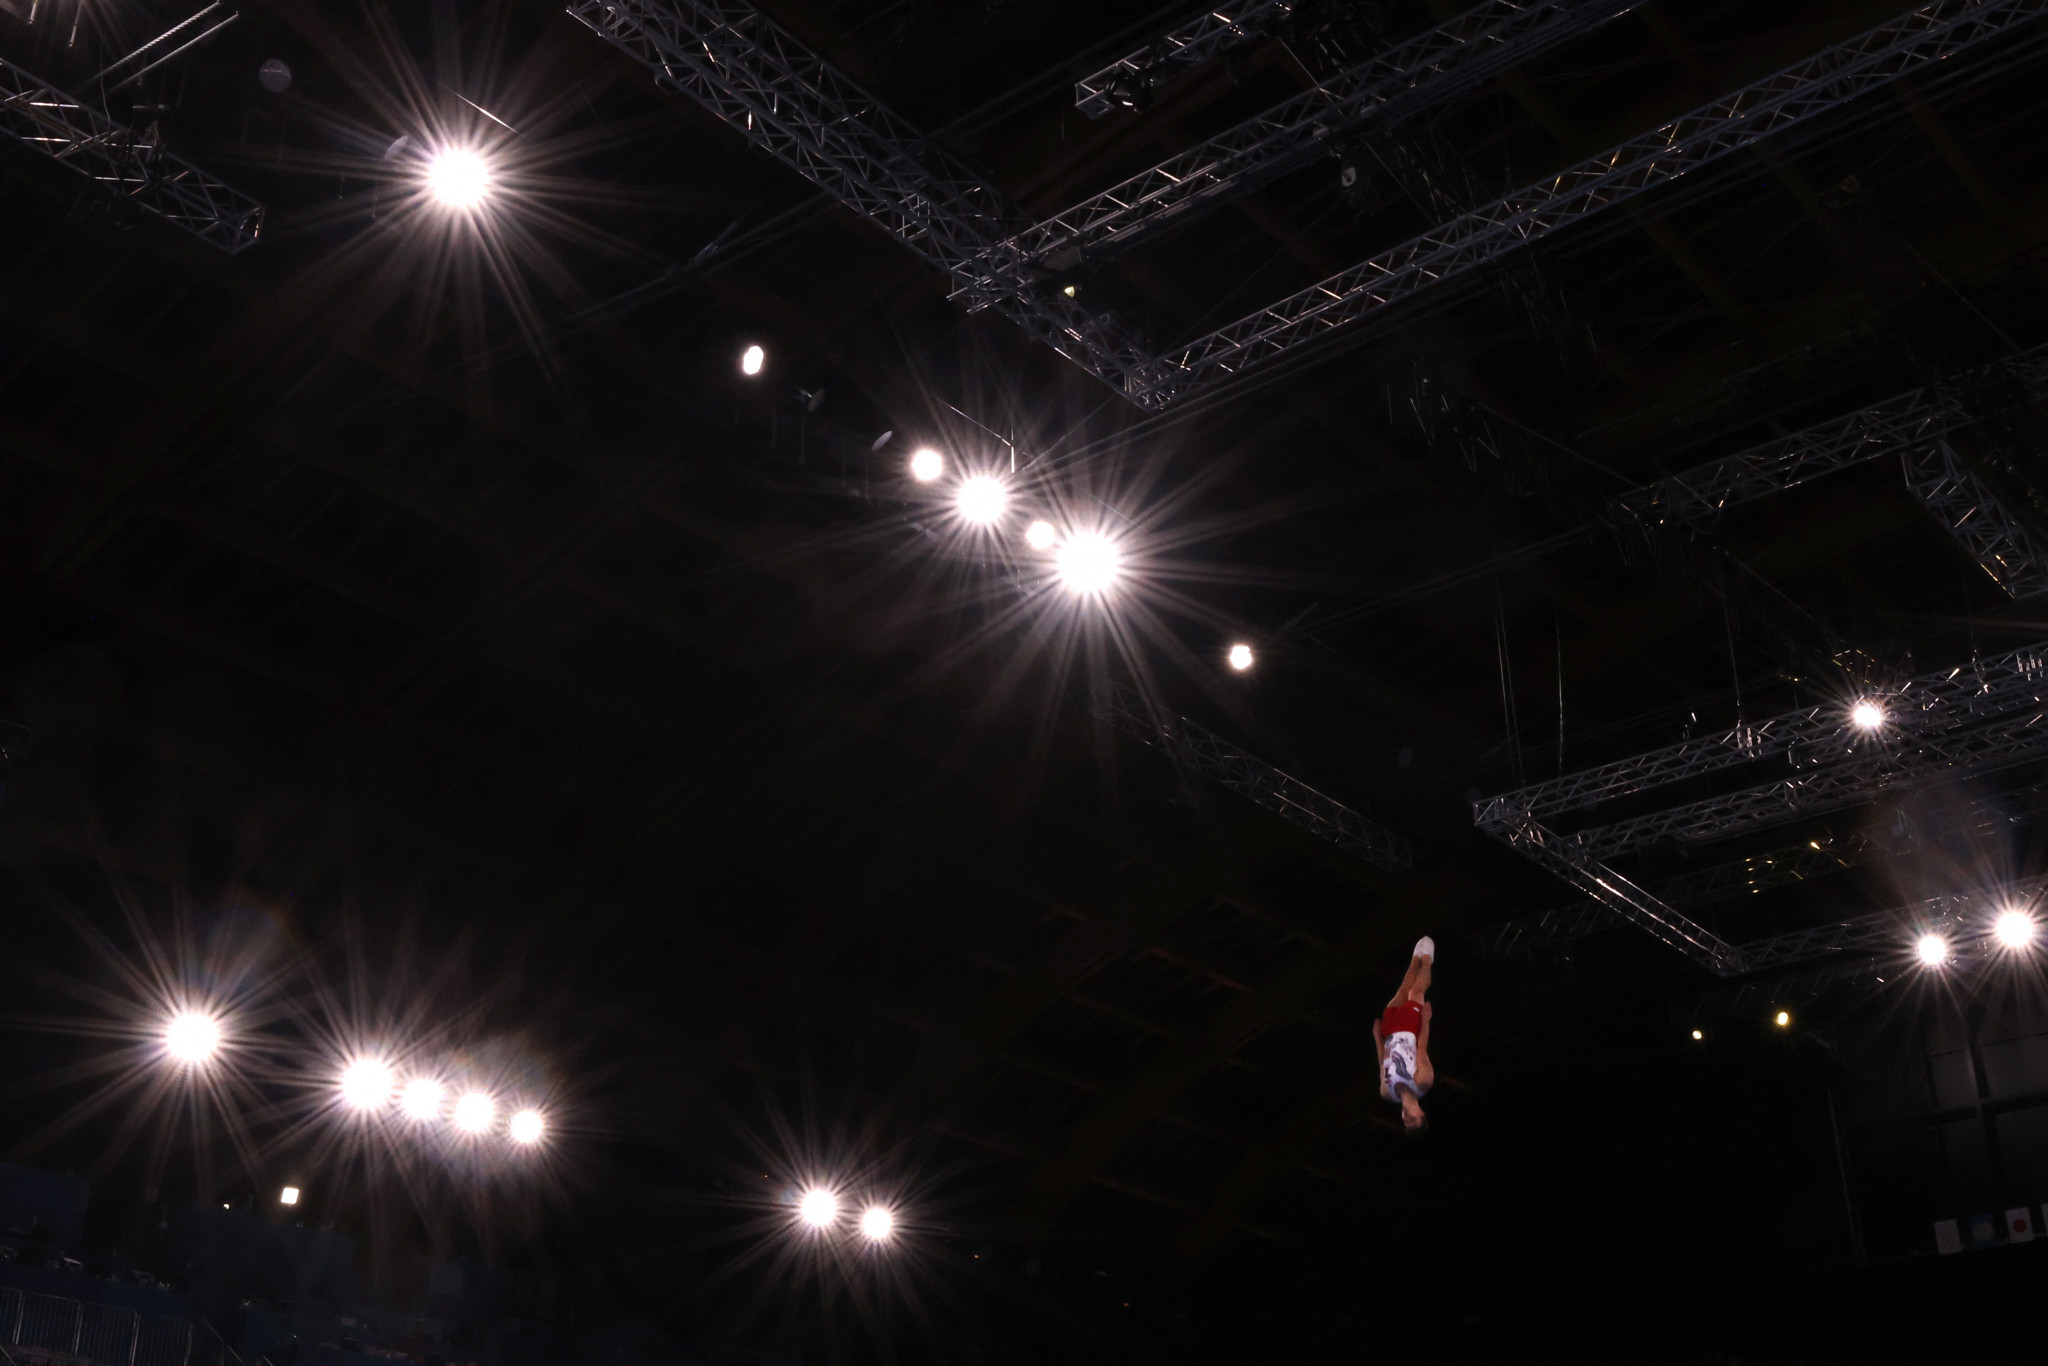 The senior qualifying events for tumbling and DMT were staged on the first day of the European Championships ©Getty Images